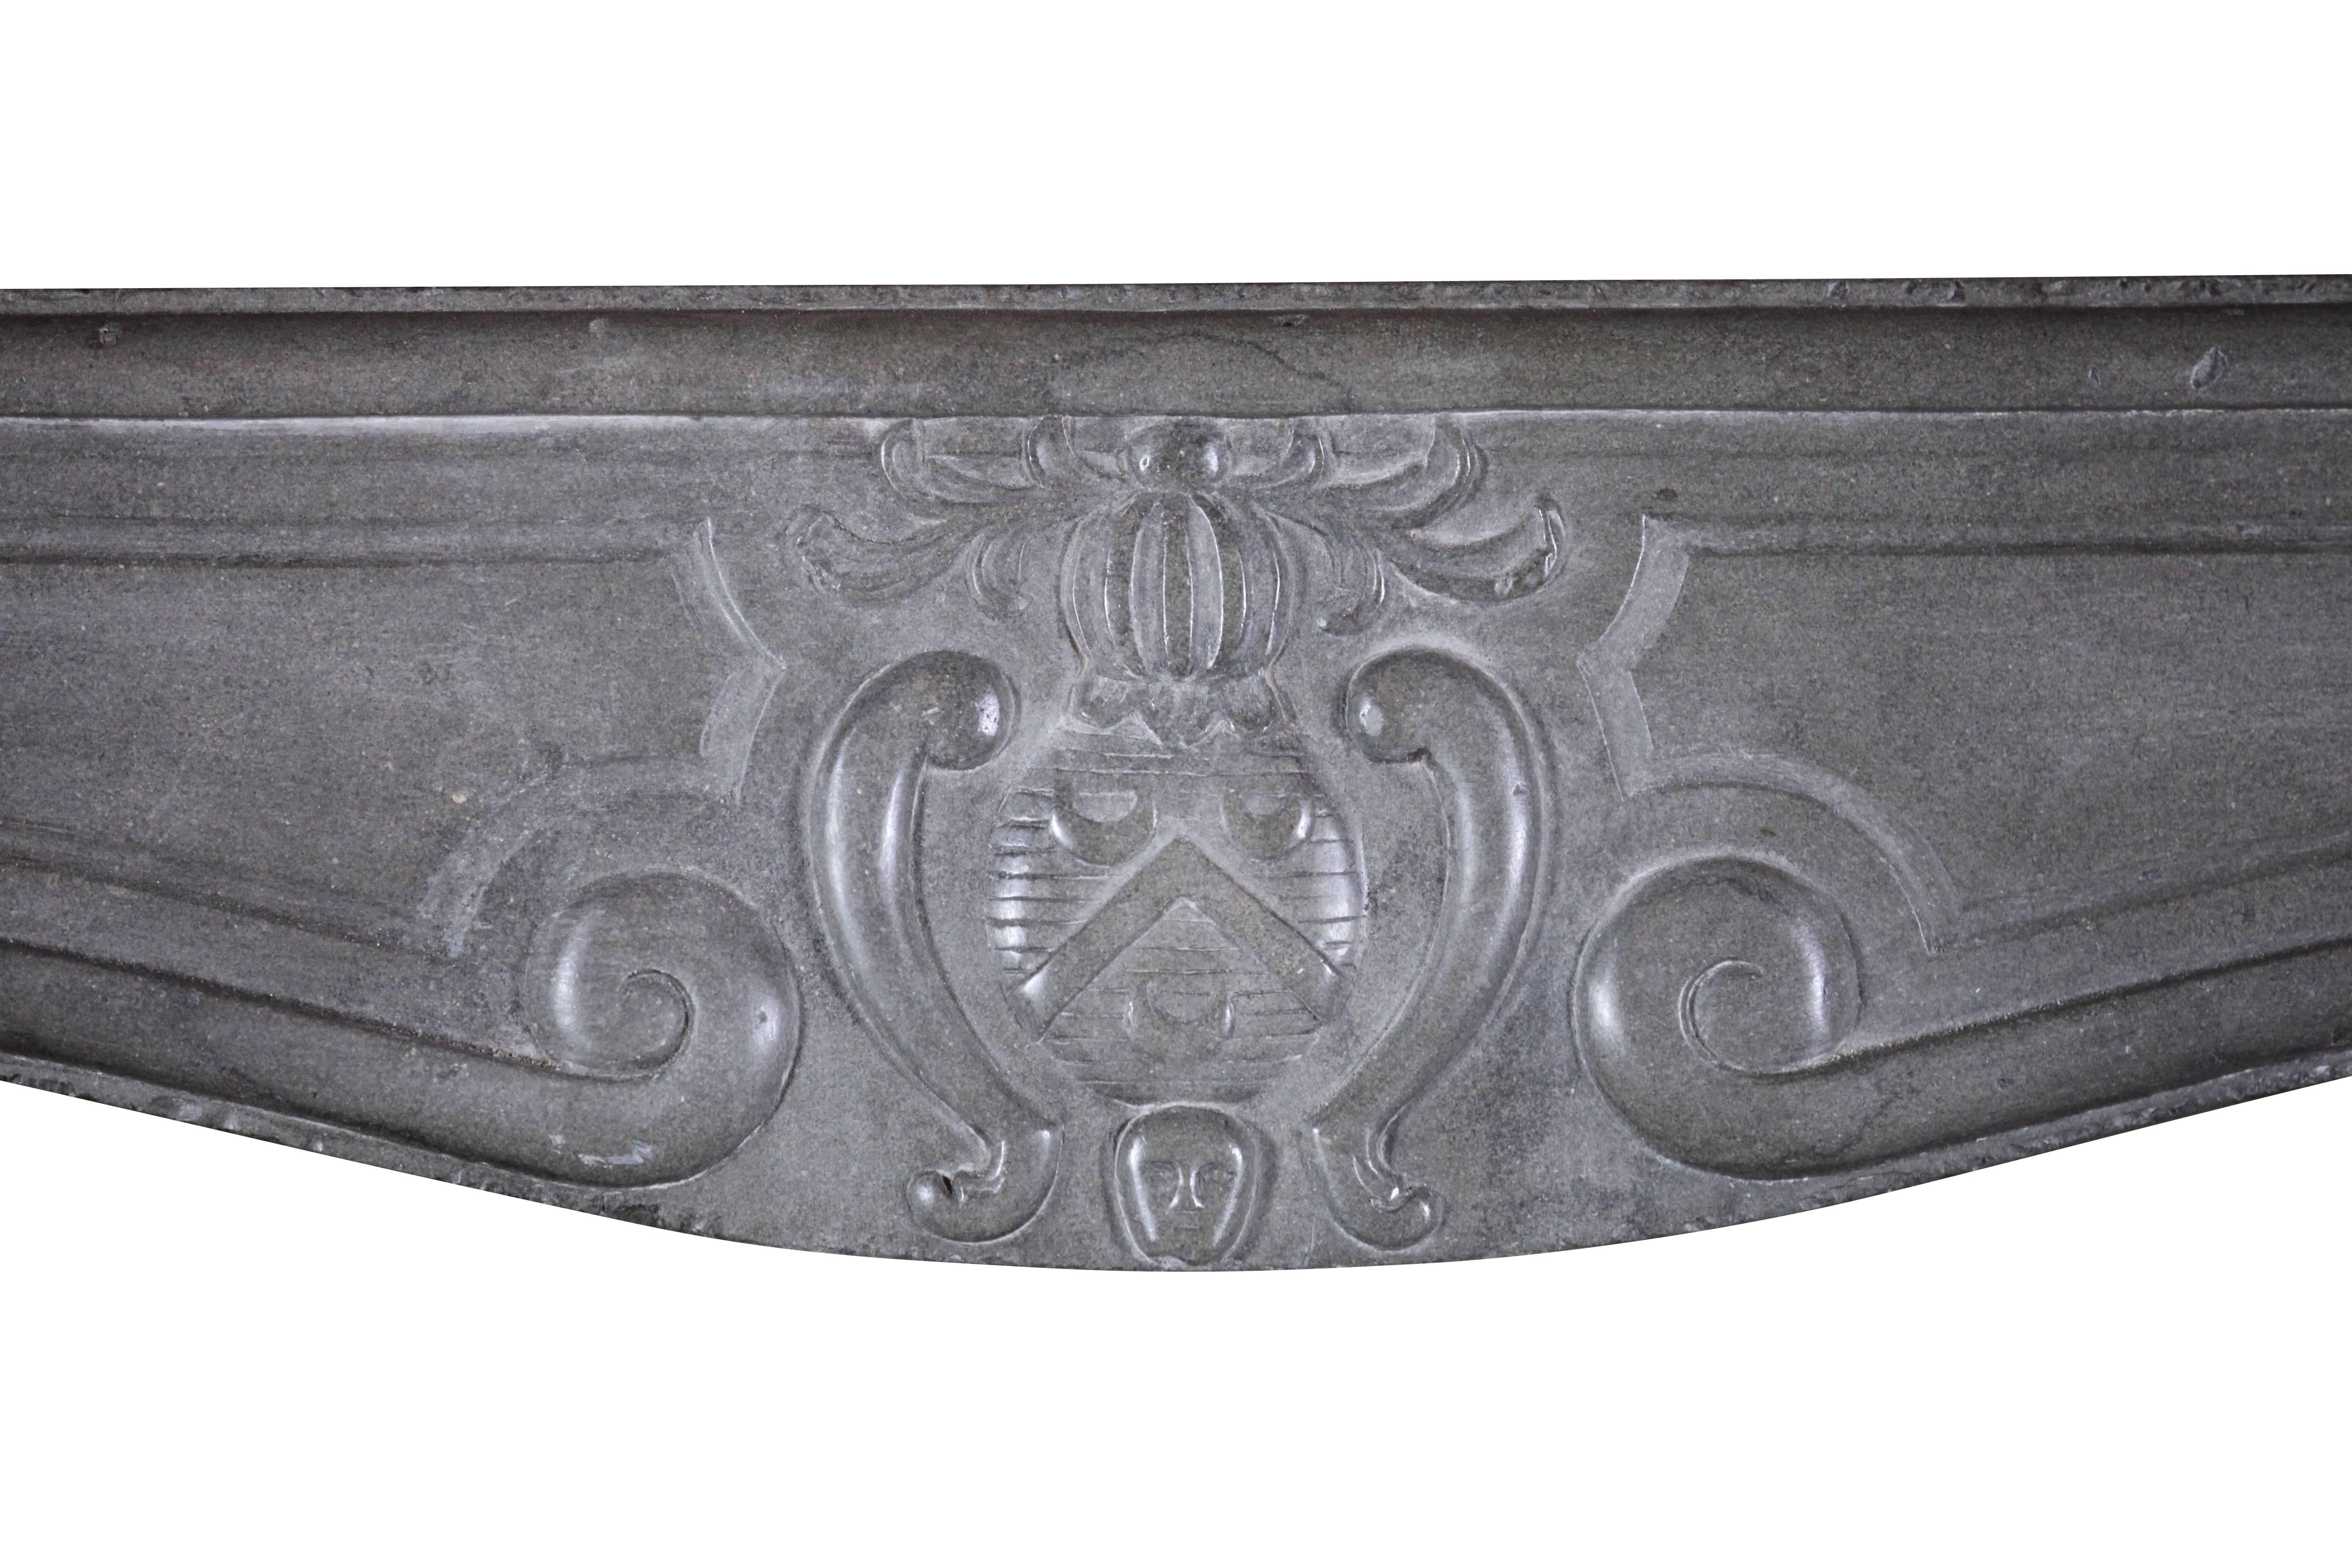 Museum quality very original antique fireplace surround in burgundy bicolor marble stone with an exceptional center. The center is the armory of an important Nobelli family.
The legs are round. This is without any doubt a once in a lifetime